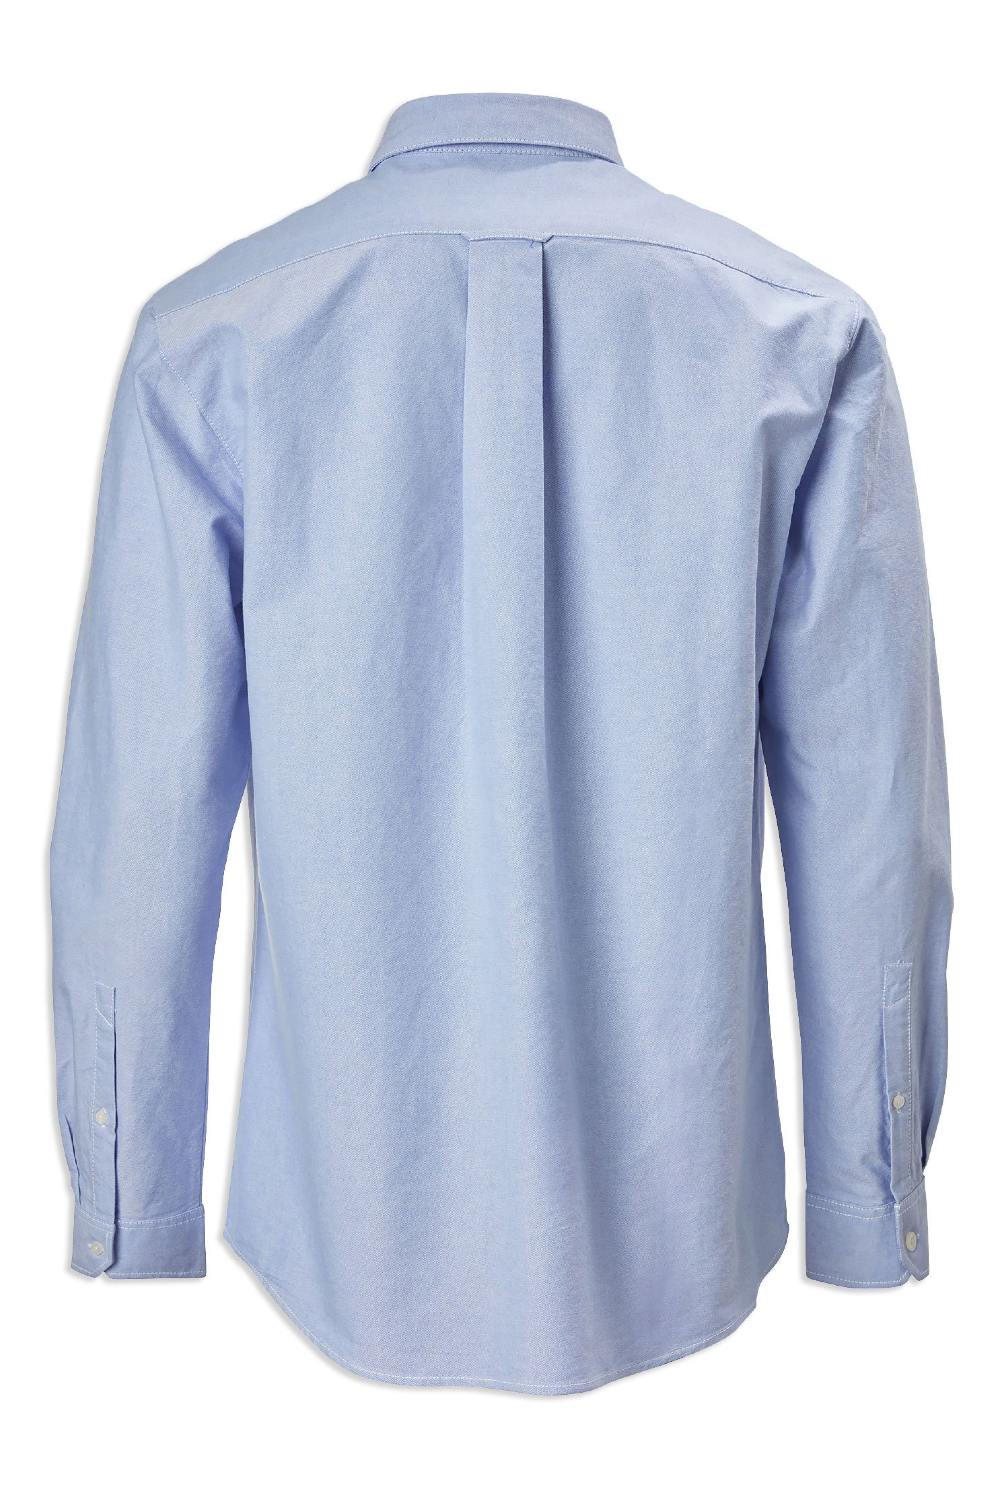 Musto Aiden Long Sleeve Oxford Shirt in Pale Blue